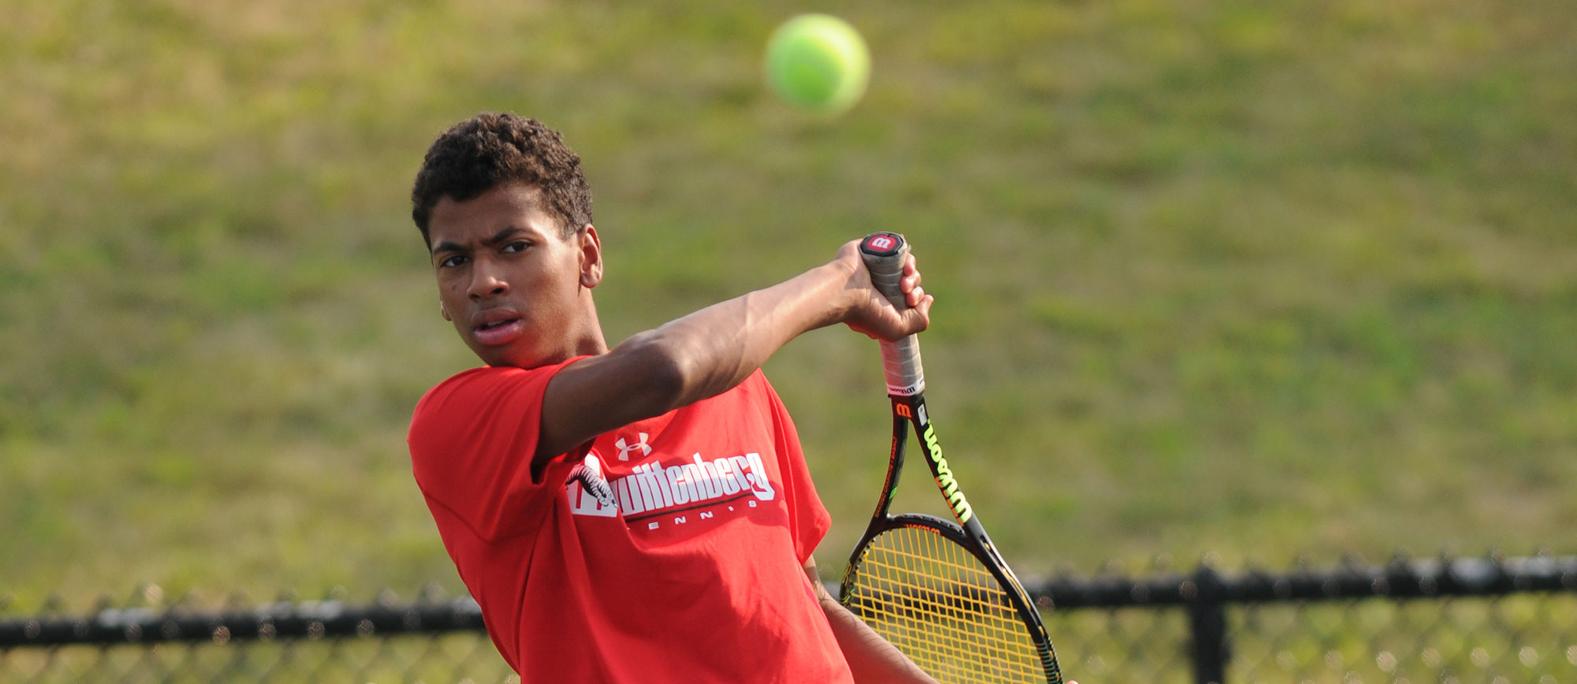 Matt Arroyo was a winner in both singles and doubles against Otterbein. File Photo | Nick Falzerano